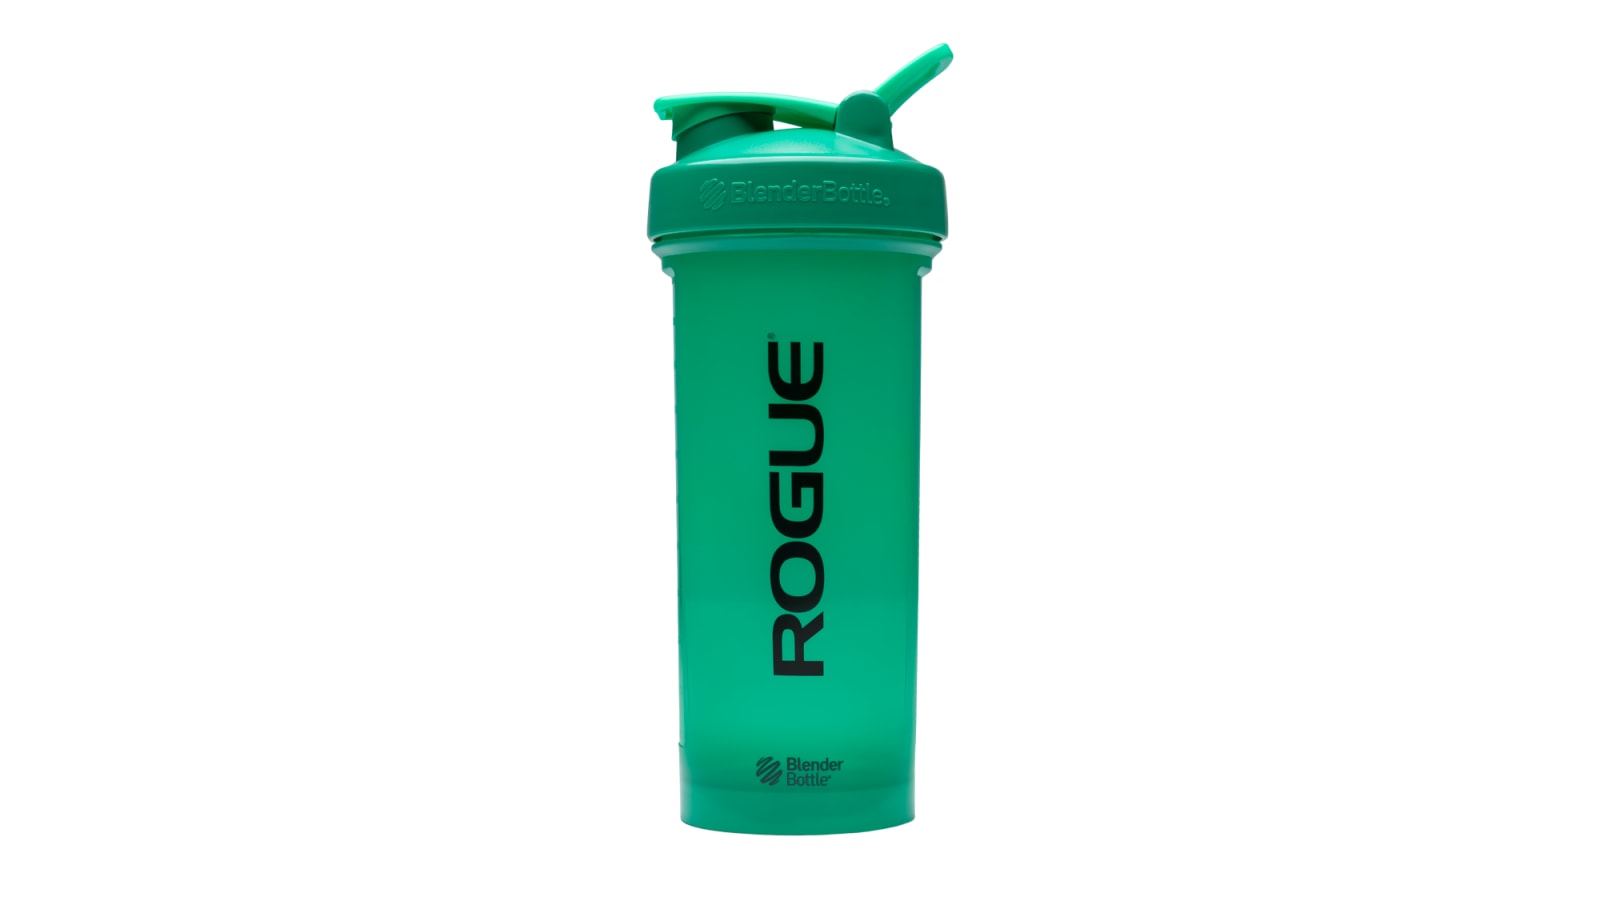 https://assets.roguefitness.com/f_auto,q_auto,c_limit,w_1600,b_rgb:ffffff/catalog/Gear%20and%20Accessories/Accessories/Shakers%20and%20Bottles/BB0042/BB0042-H_rsm2dx.png